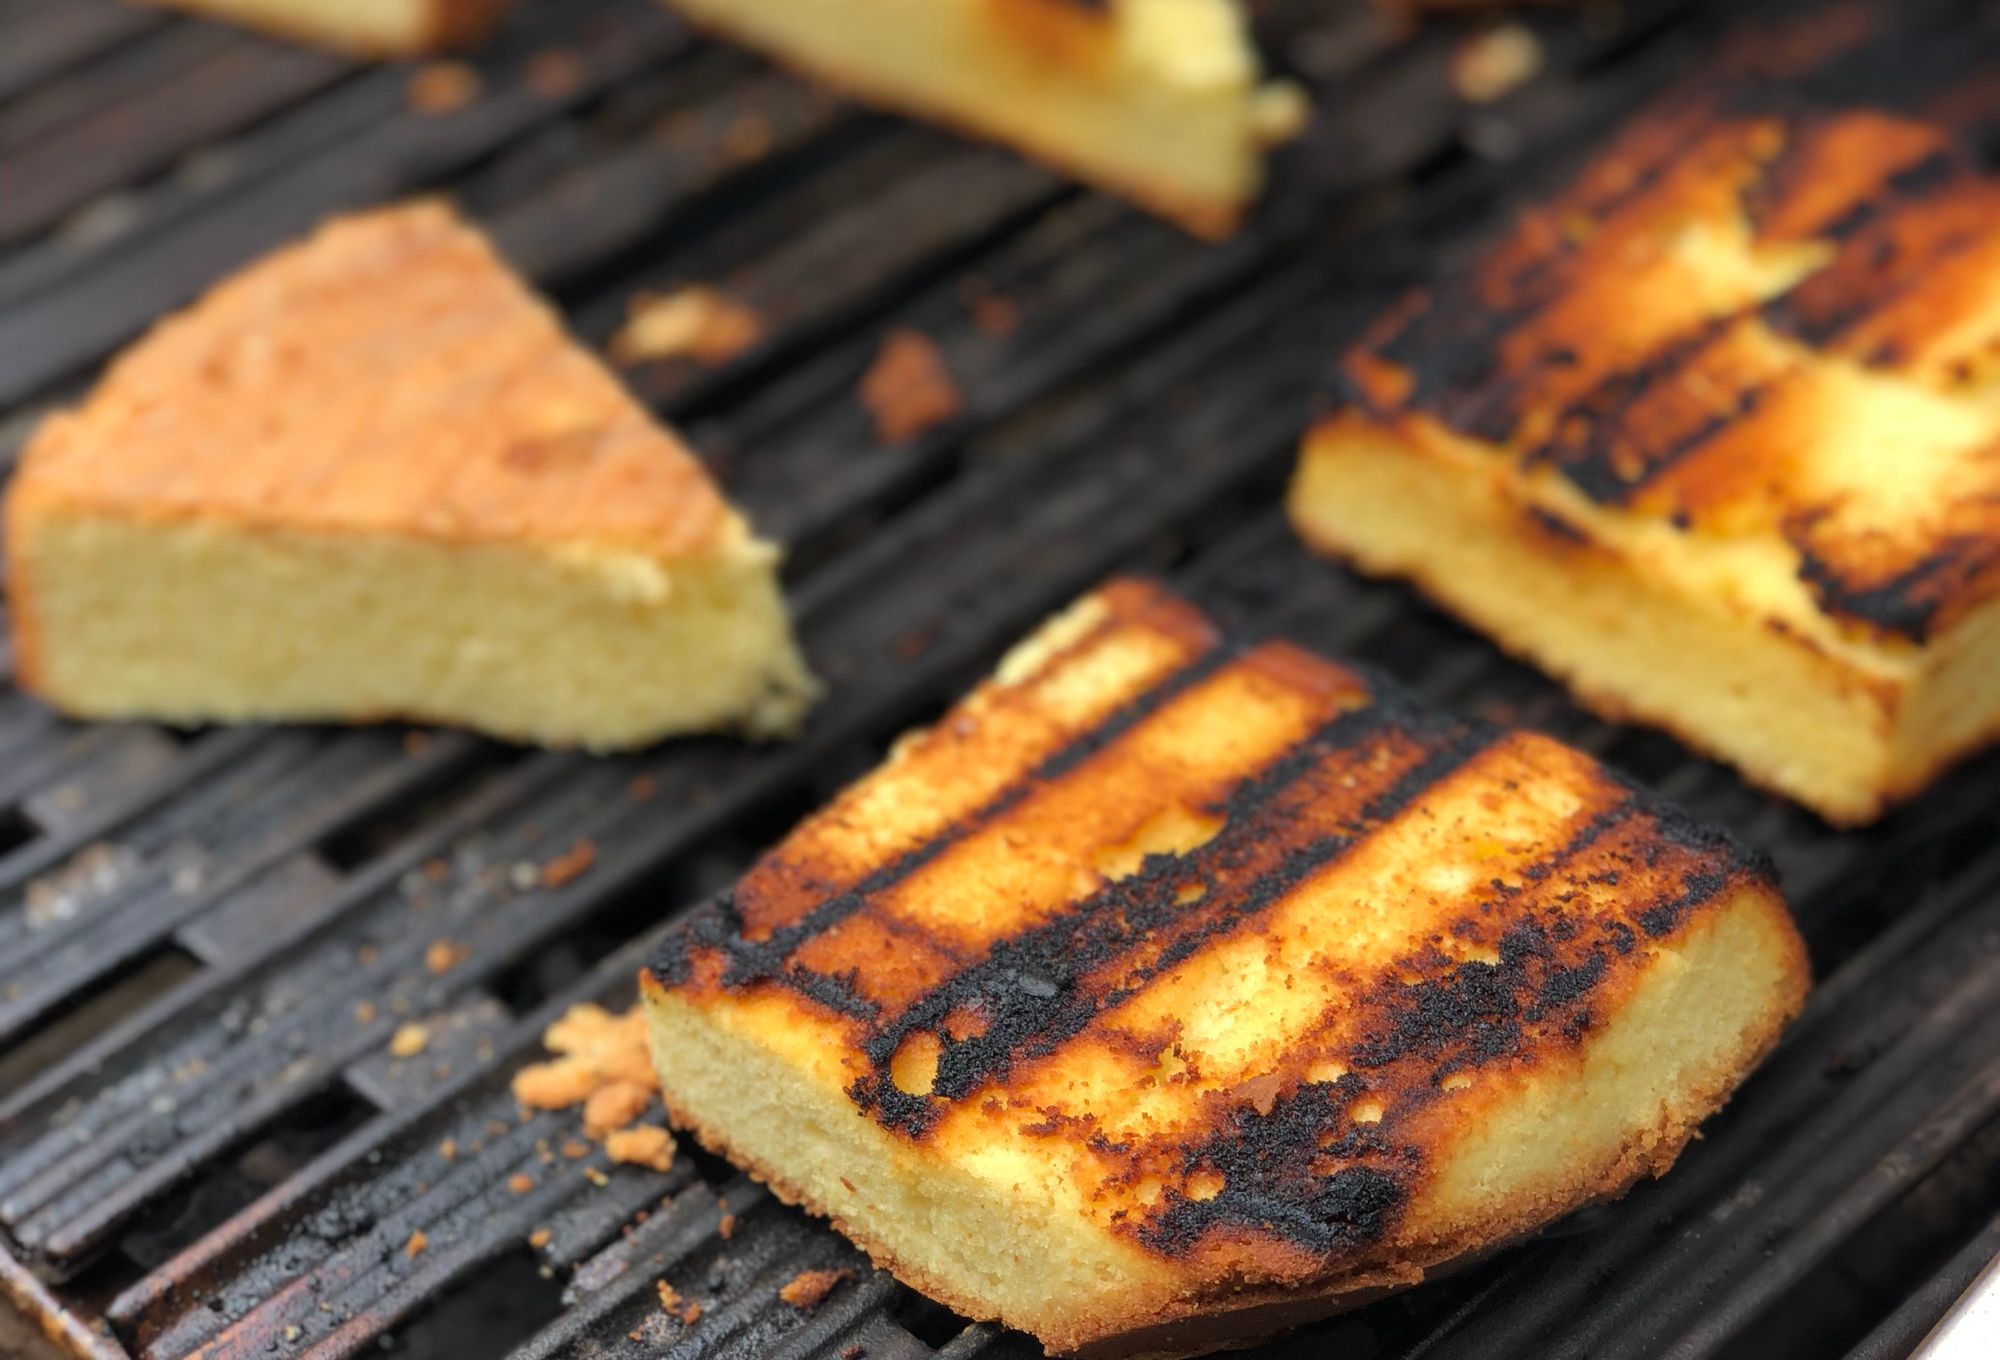 You should grill desserts more. Here's an example of why.